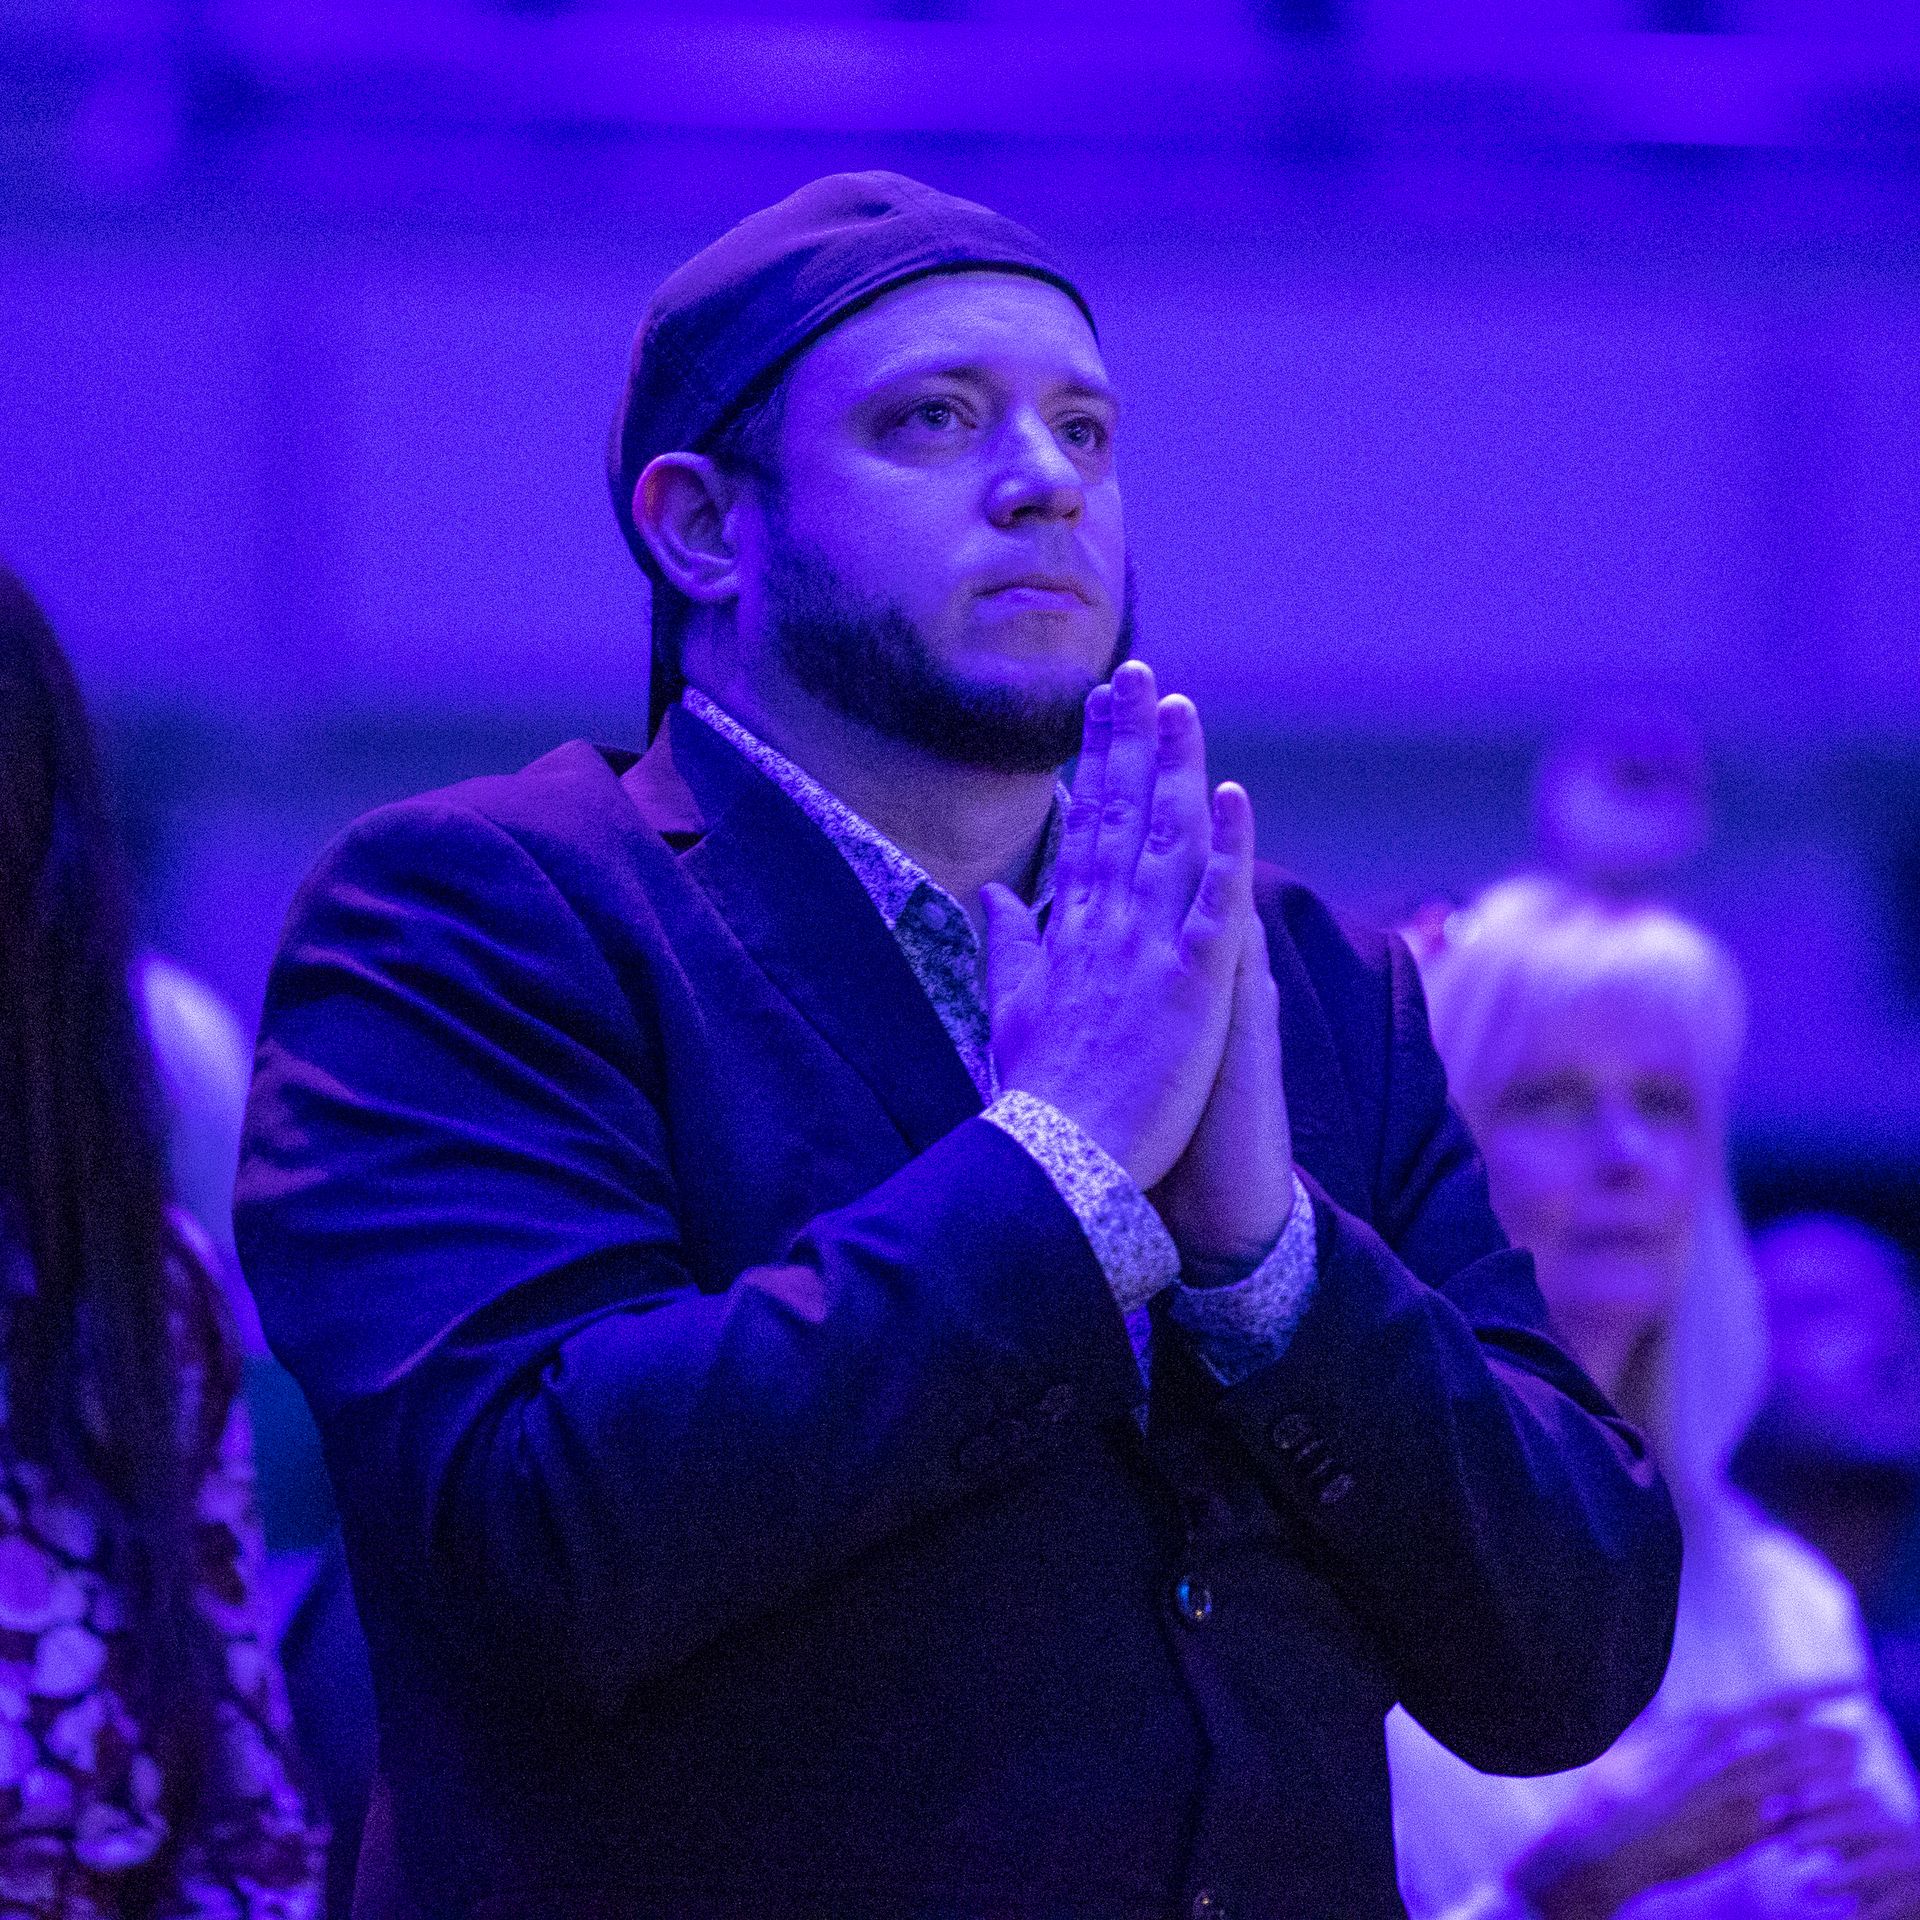 A bearded man in a backwards hat and suit, praying